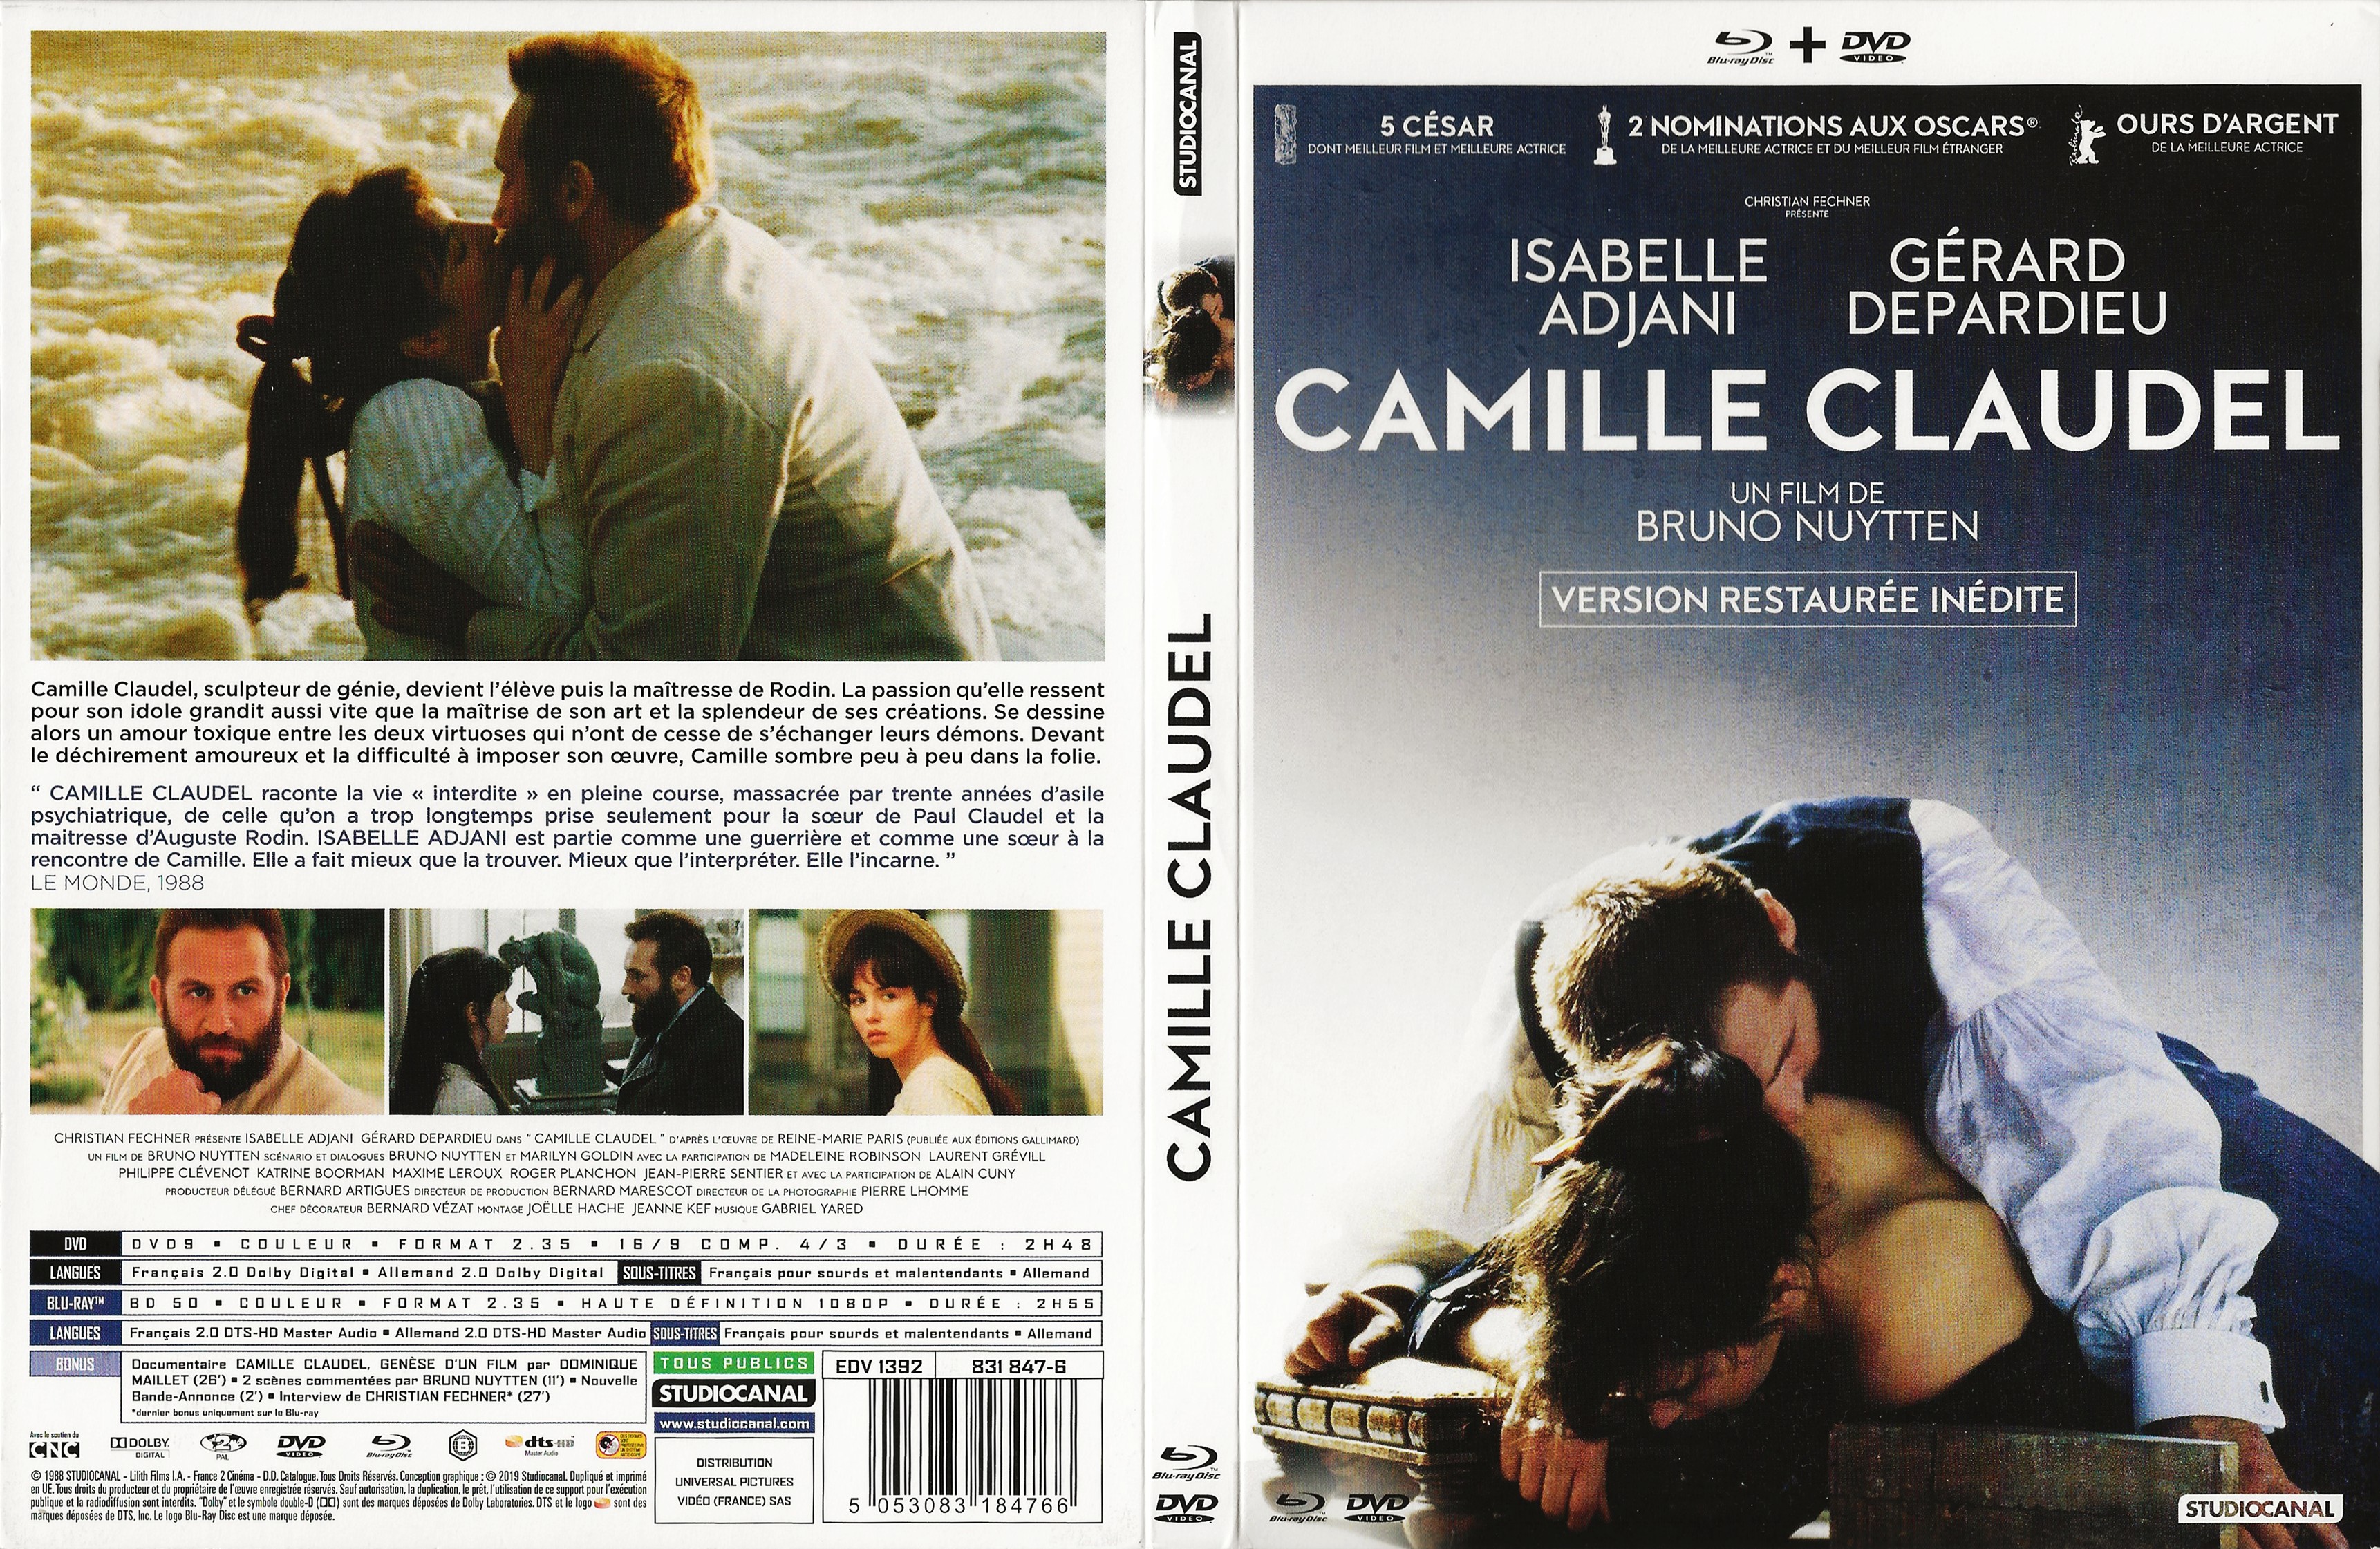 Jaquette DVD Camille Claudel (BLU-RAY)